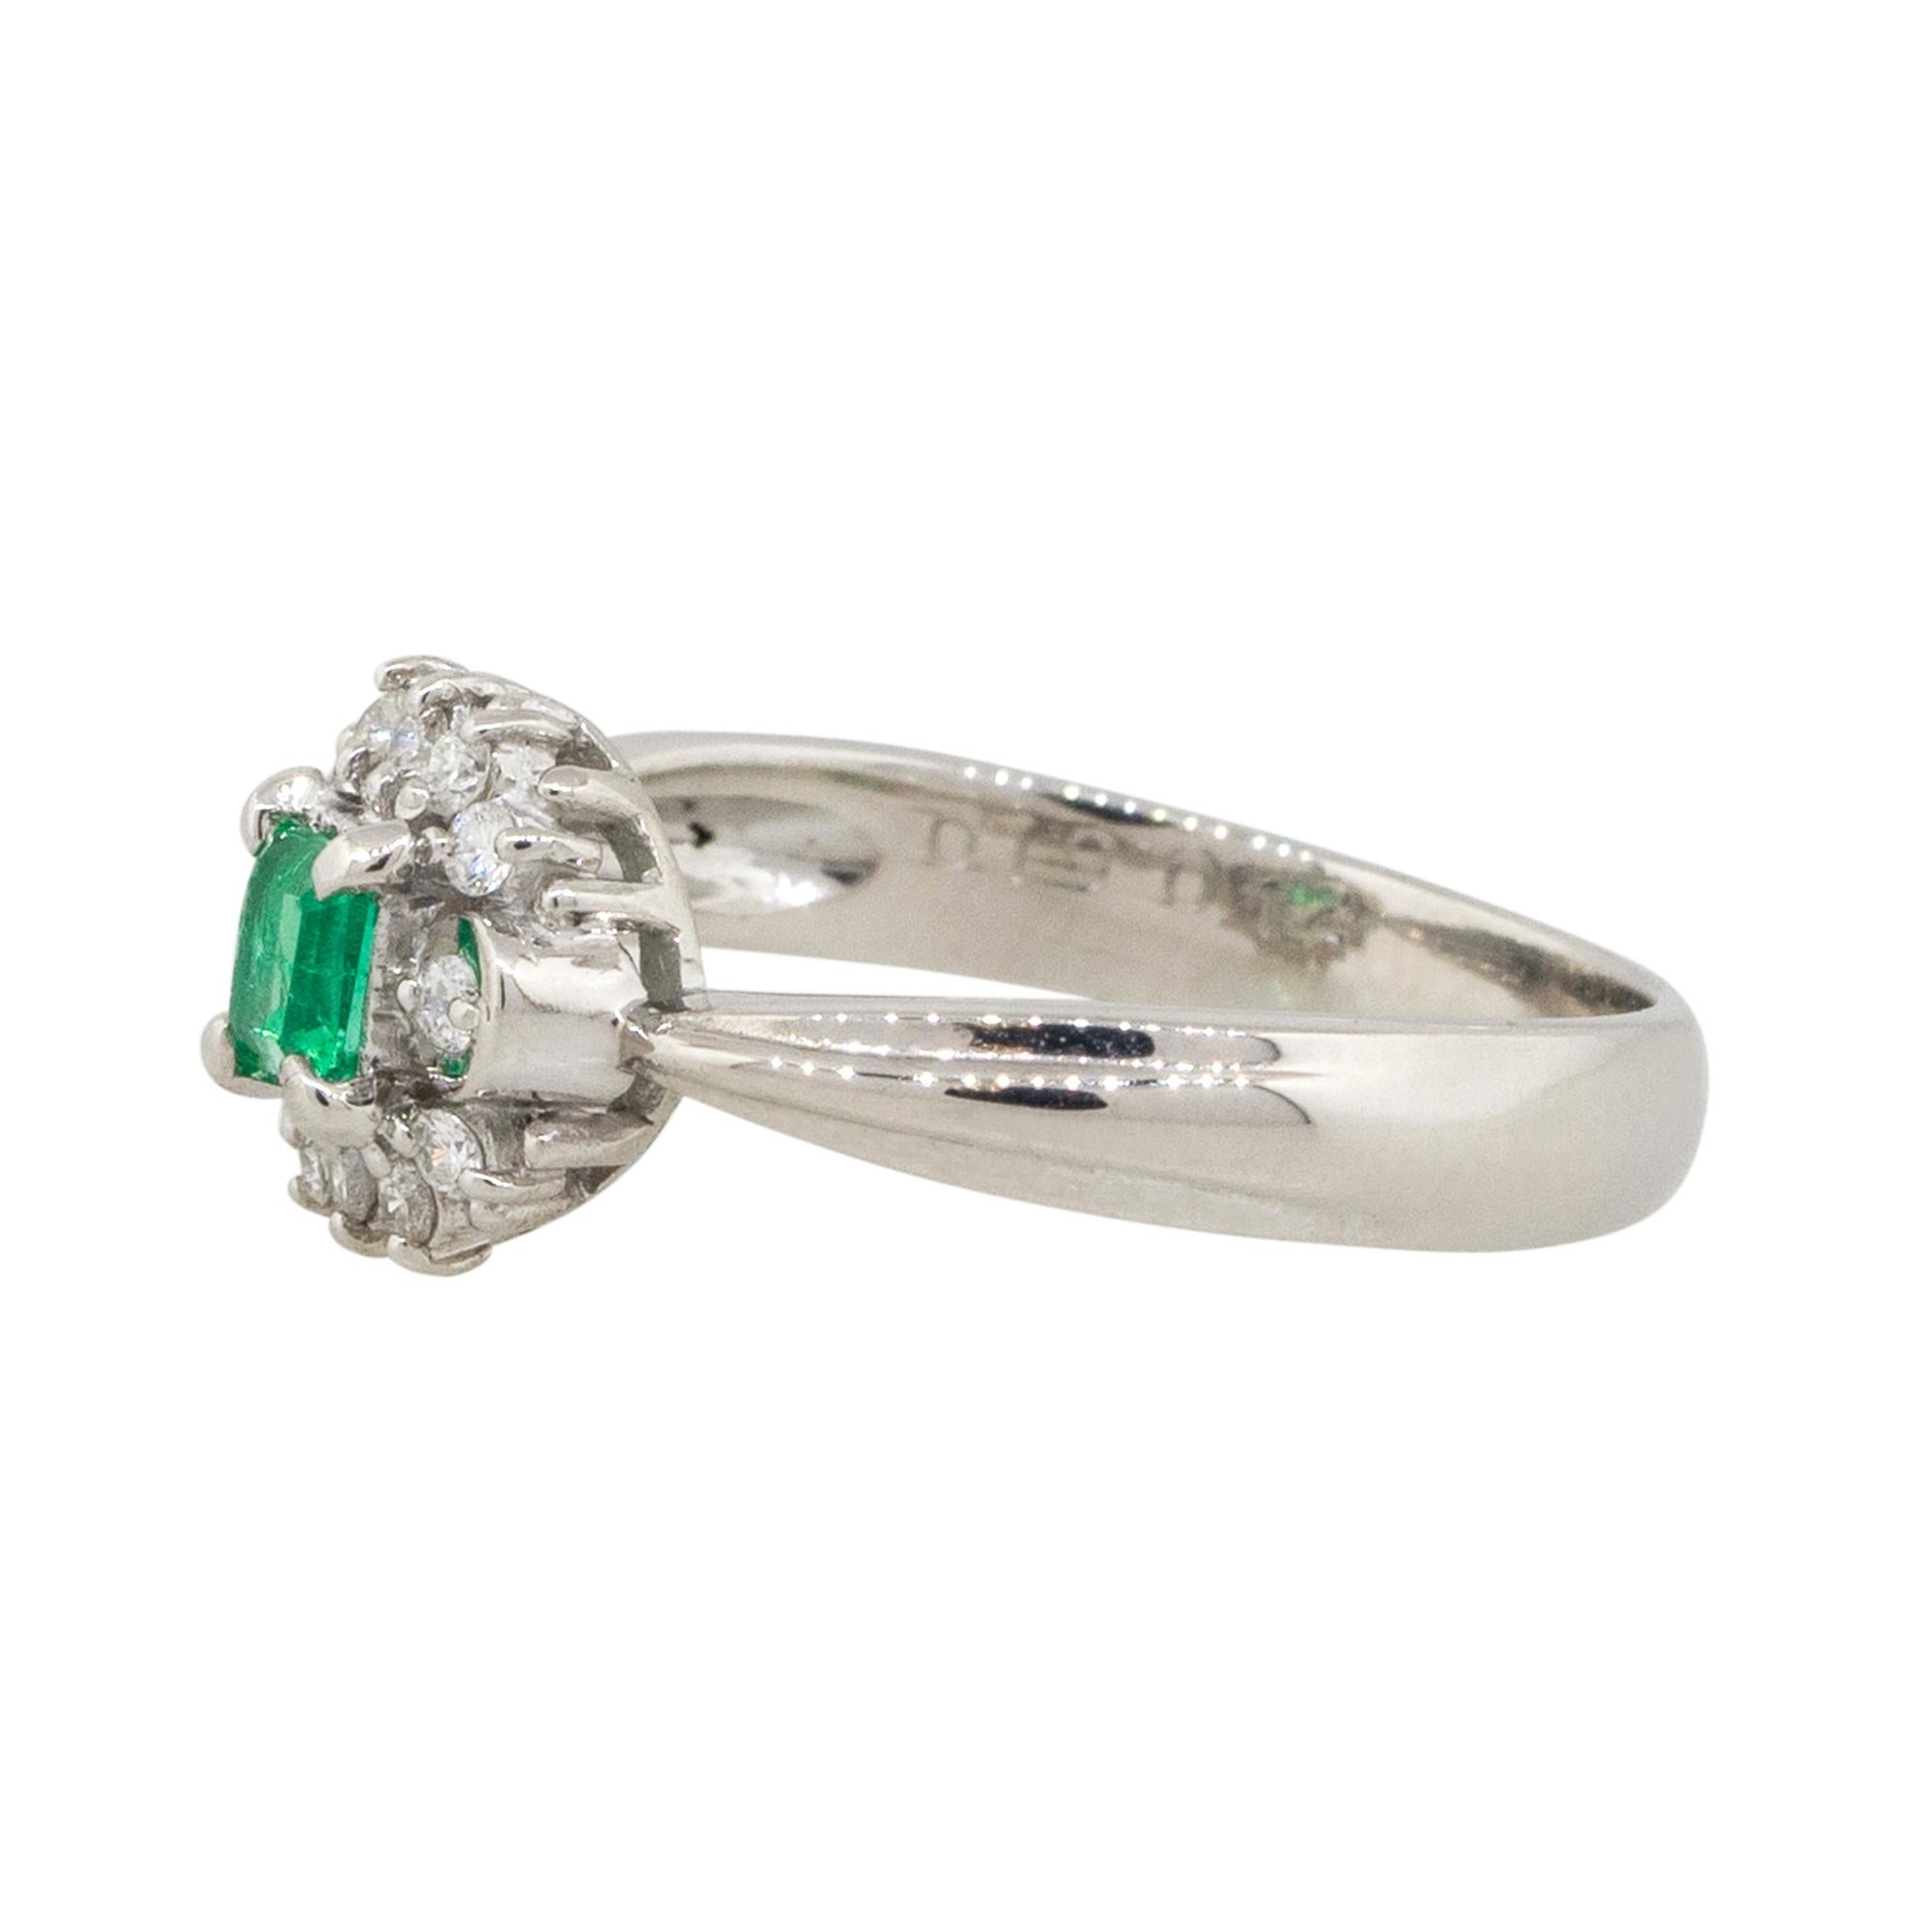 Material: Platinum
Gemstone details: Approx. 0.19ctw Emerald center stone
Diamond details: Approx. 0.12tw of round cut Diamonds. Diamonds are G/H in color and VS in clarity
Ring Size: 5.75
Ring Measurements: 0.75